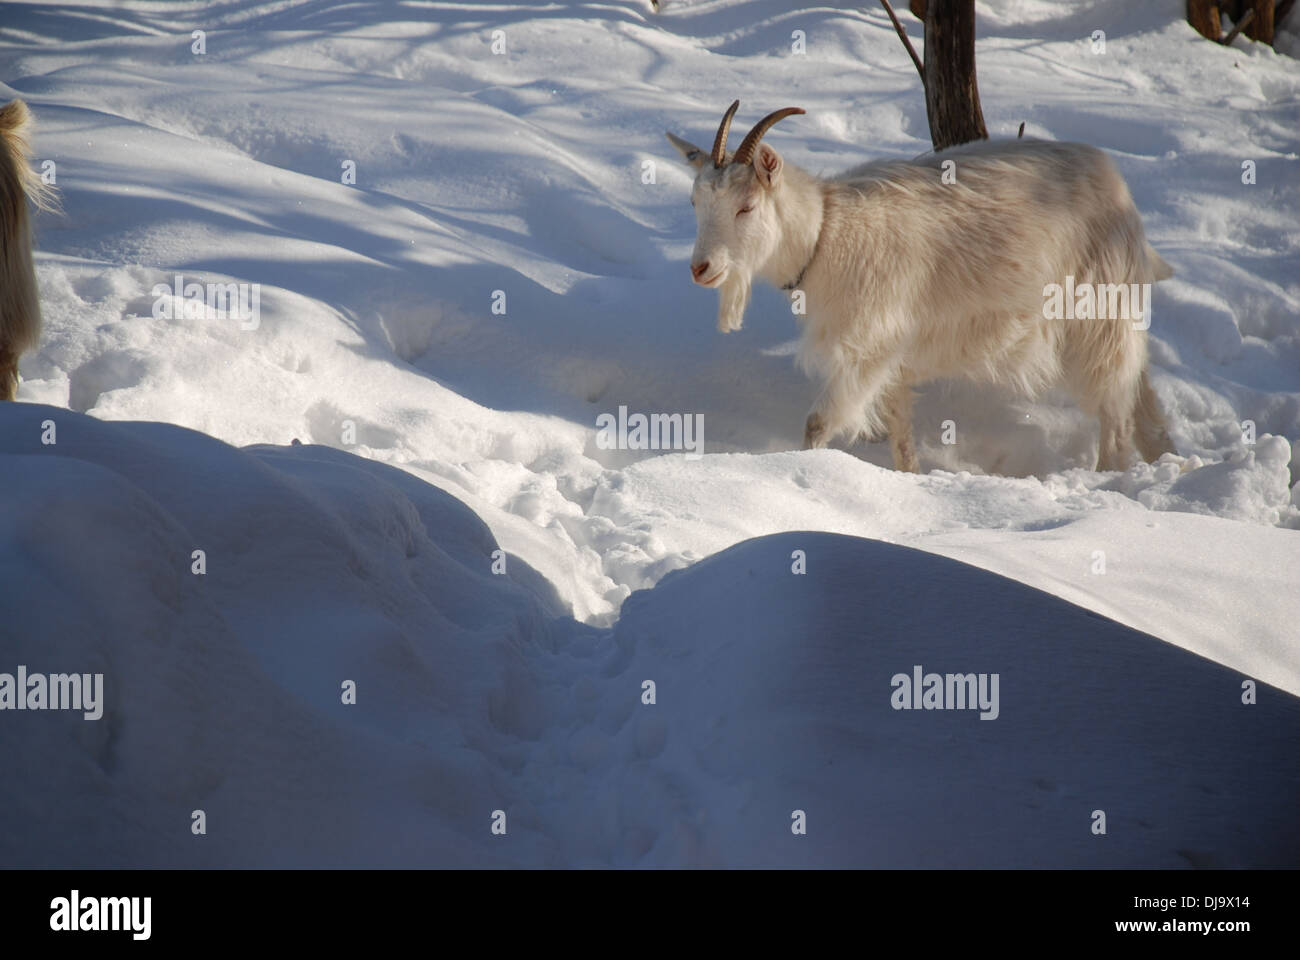 Goats in snow Stock Photo